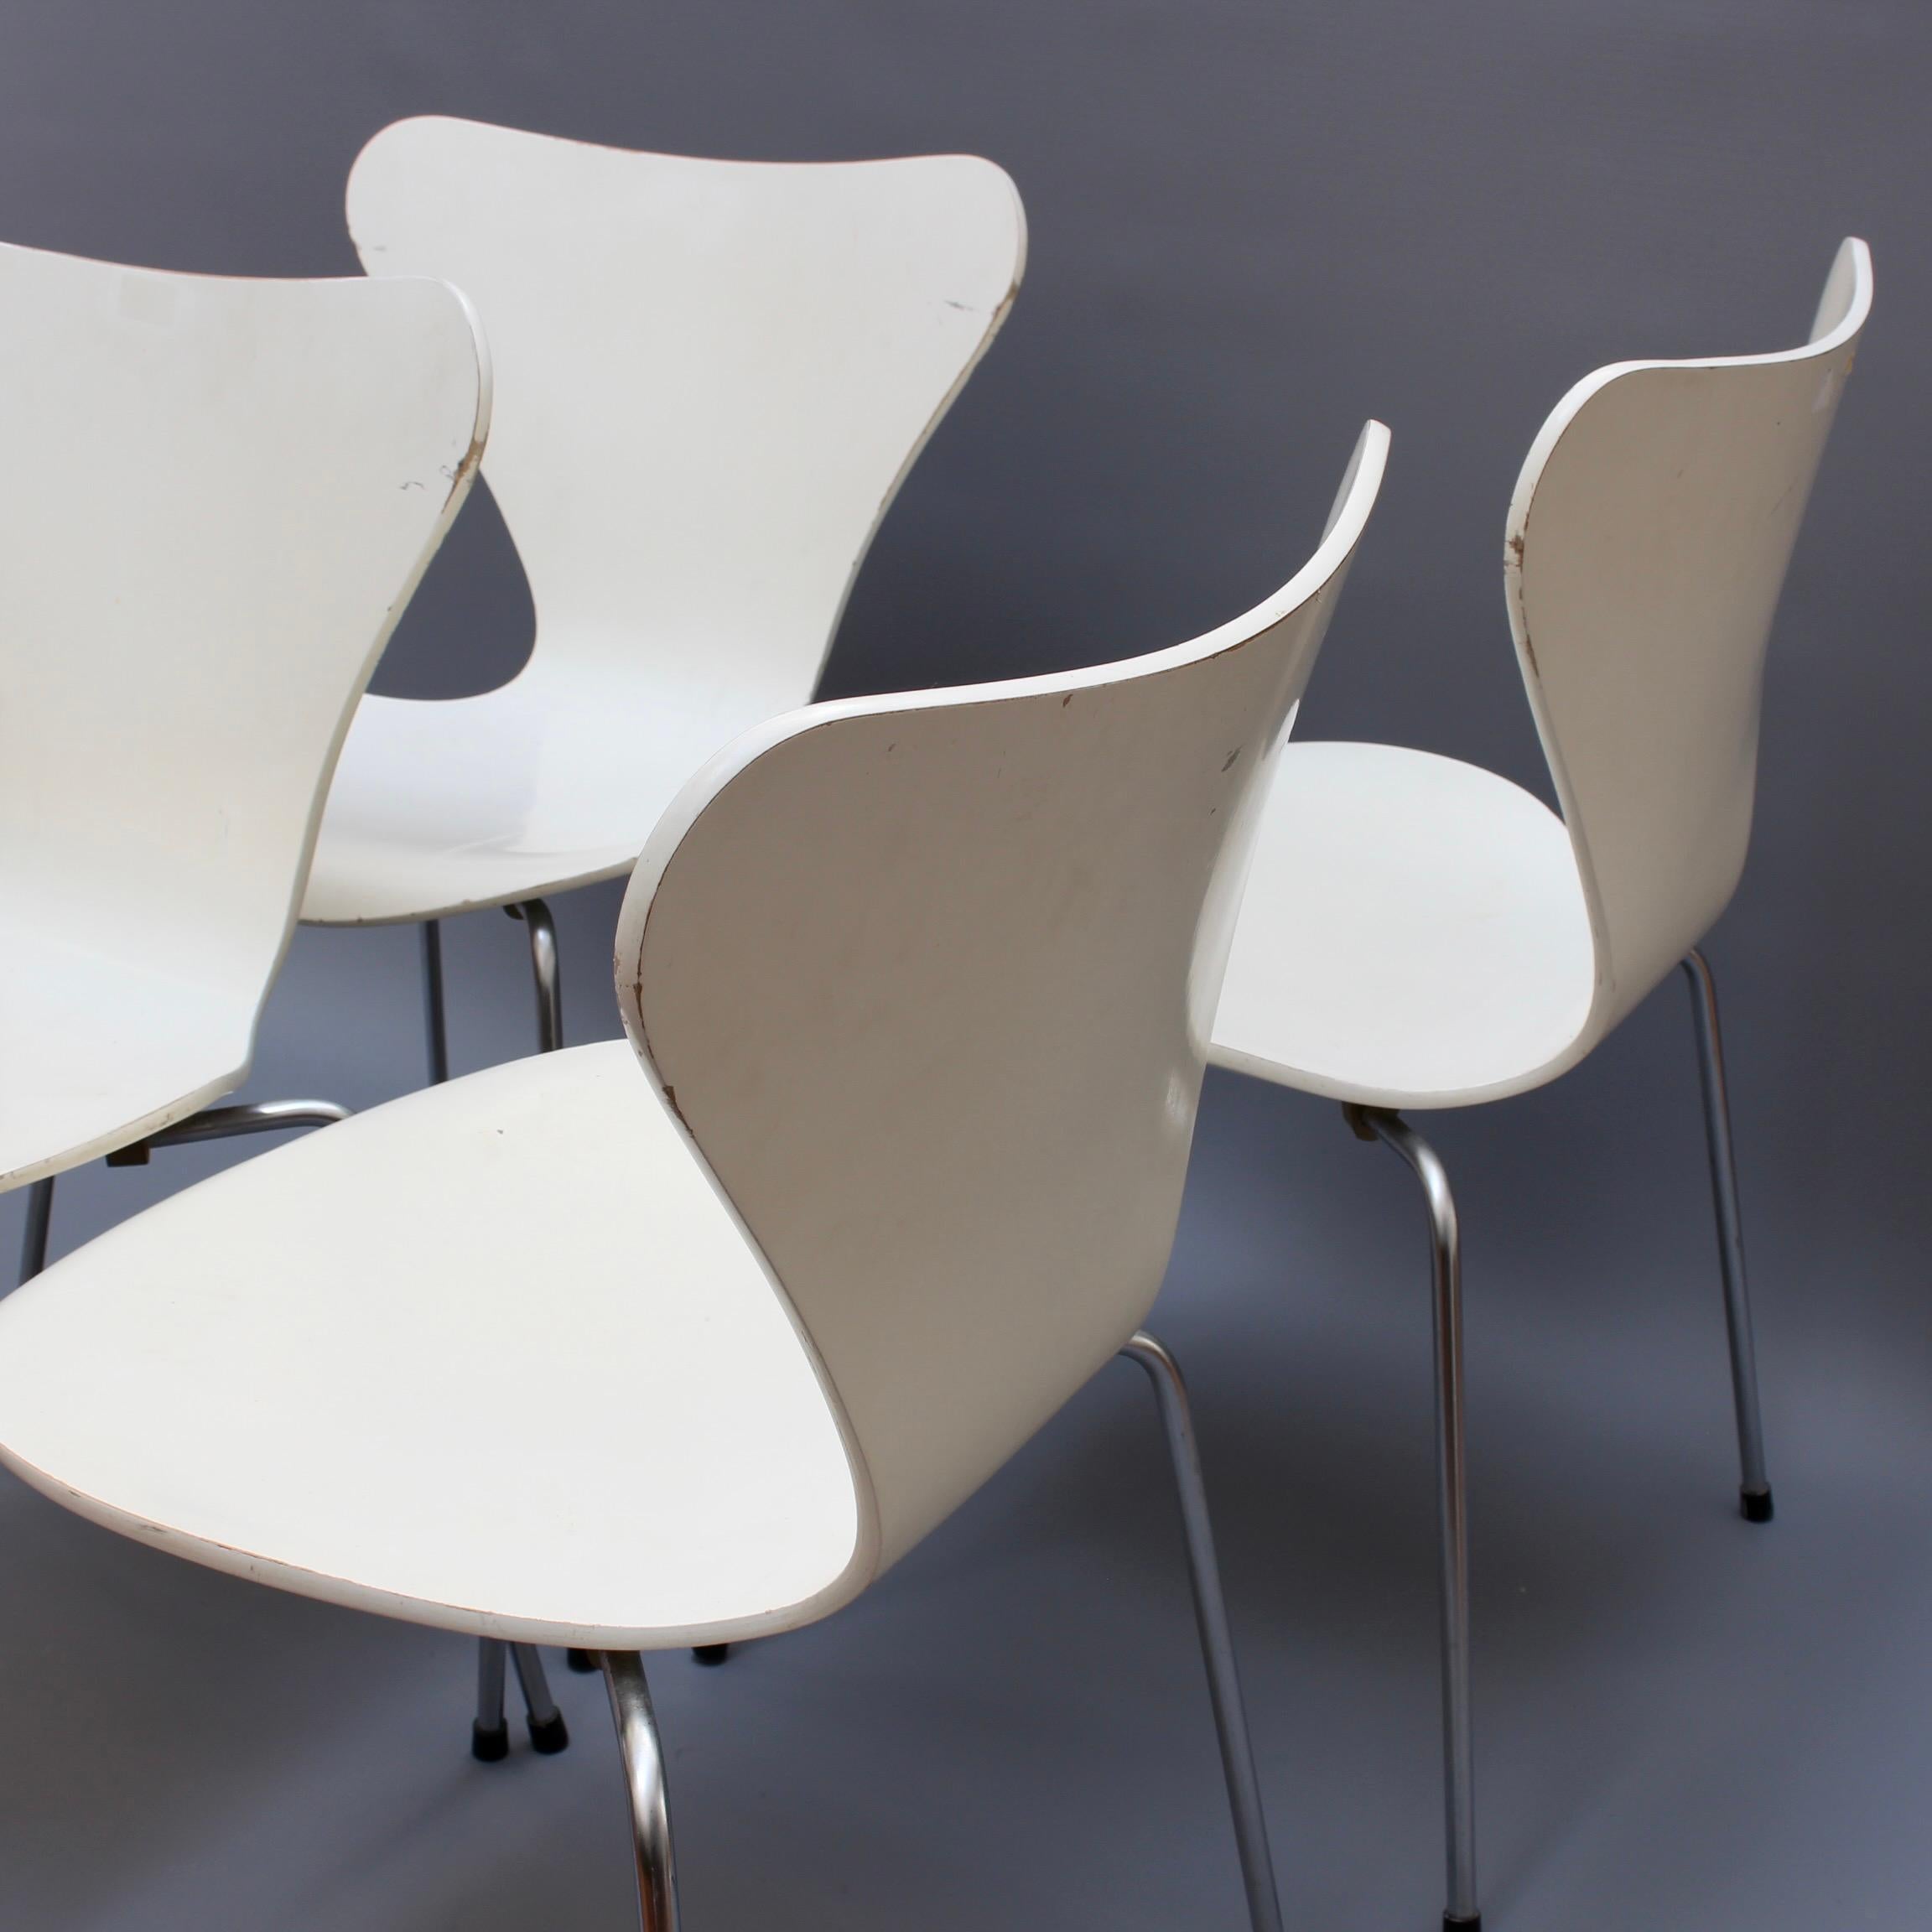 Bentwood Set of Four 'Series 7' White Chairs by Arne Jacobsen for Fritz Hansen, 1973